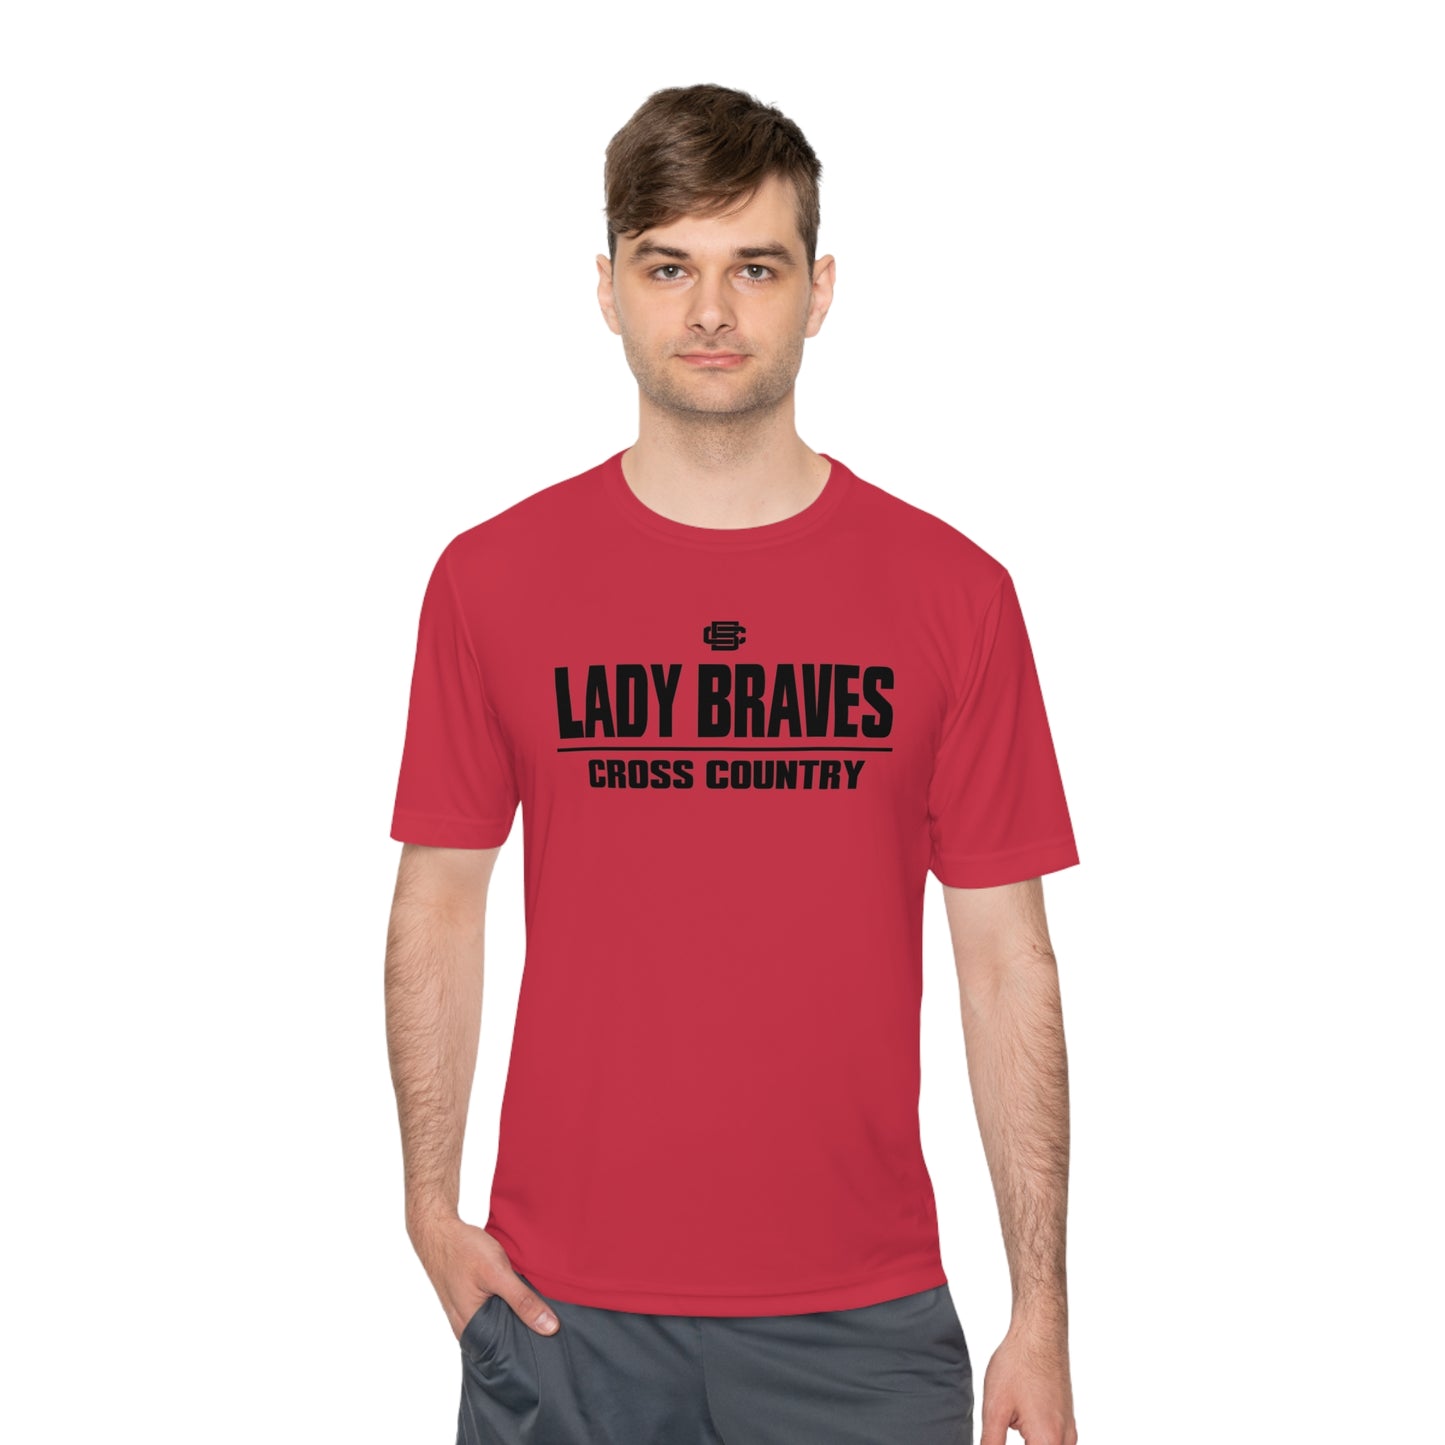 Lady Braves Cross Country Moisture Wicking Tee